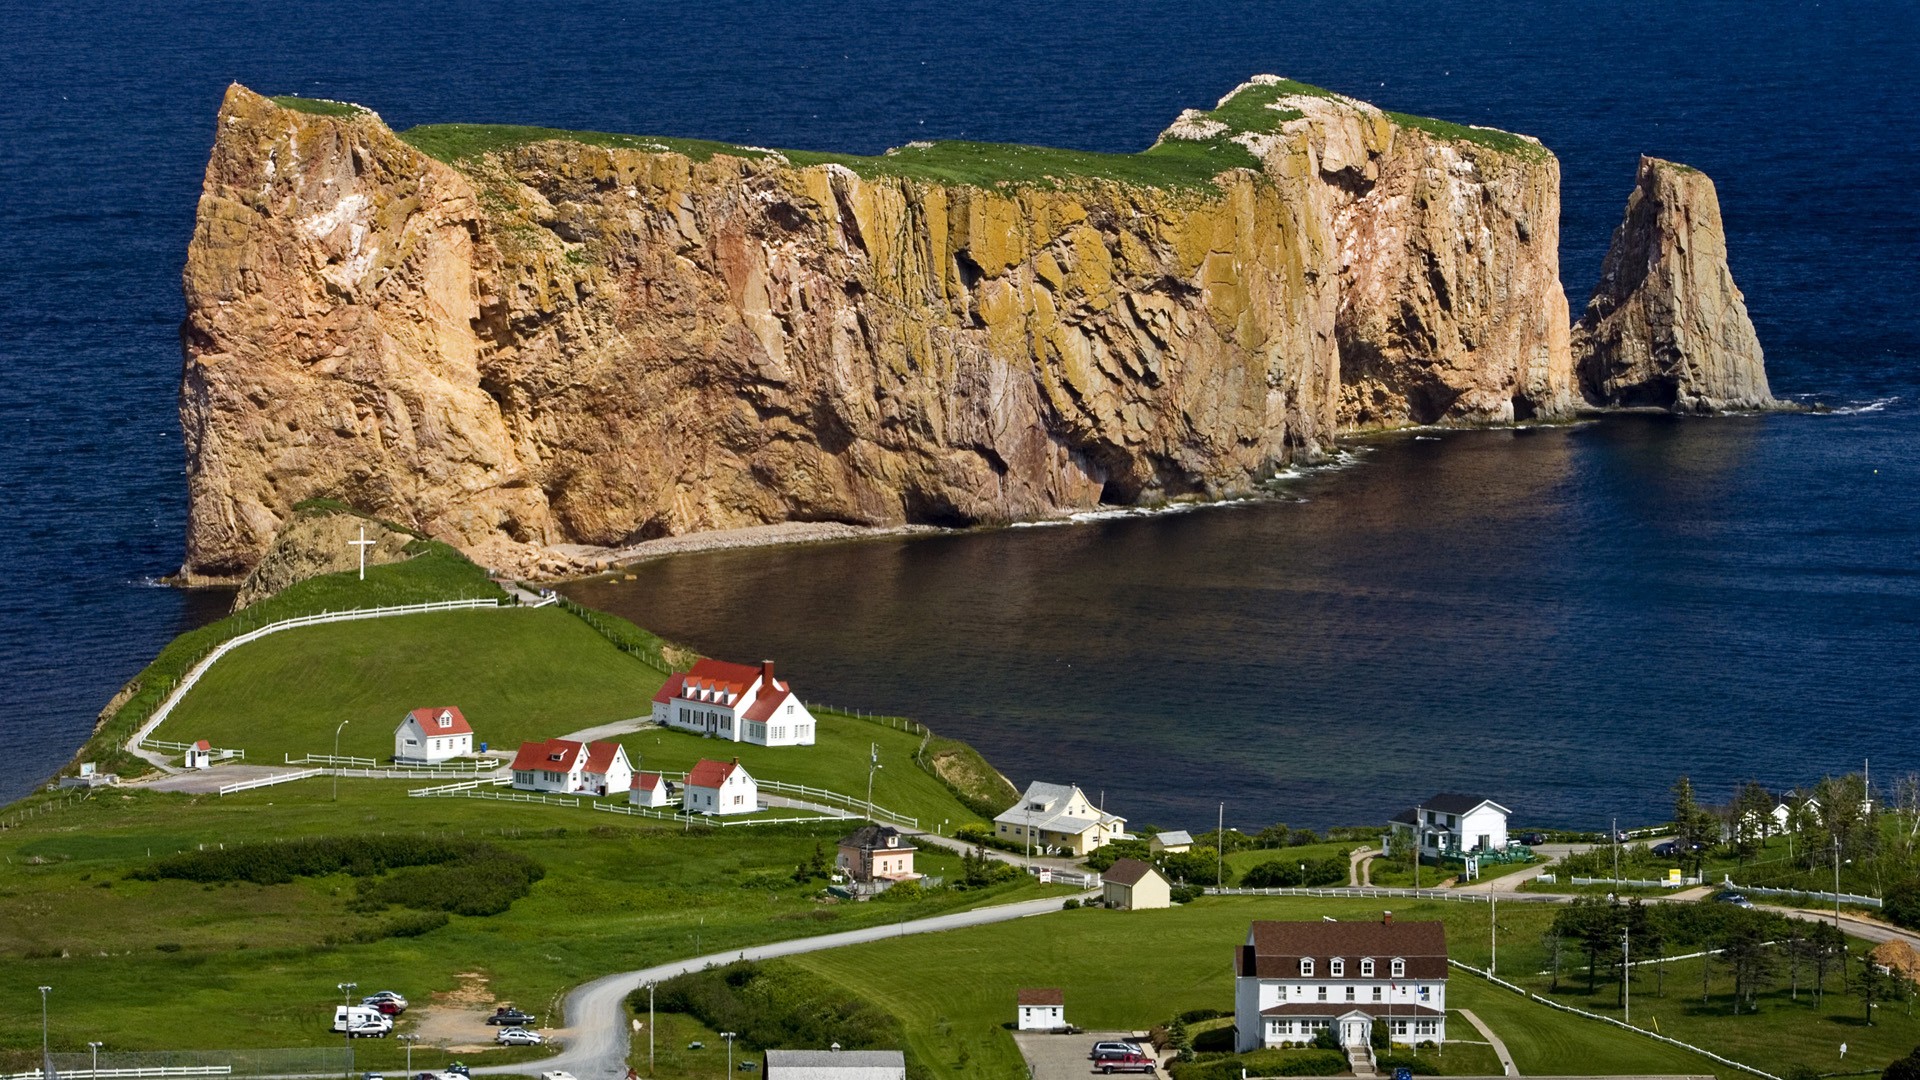  Rocher Percé or Percé Rock was so named by Samuel de Champlain in 1607.  Forming the tip of the Gaspé  Peninsula, it marks the entrance to the Gulf of St. Lawrence.  The surrealist poet André Breton described it as "razor blade rising out of the water... a marvelous iceberg of moon stone"